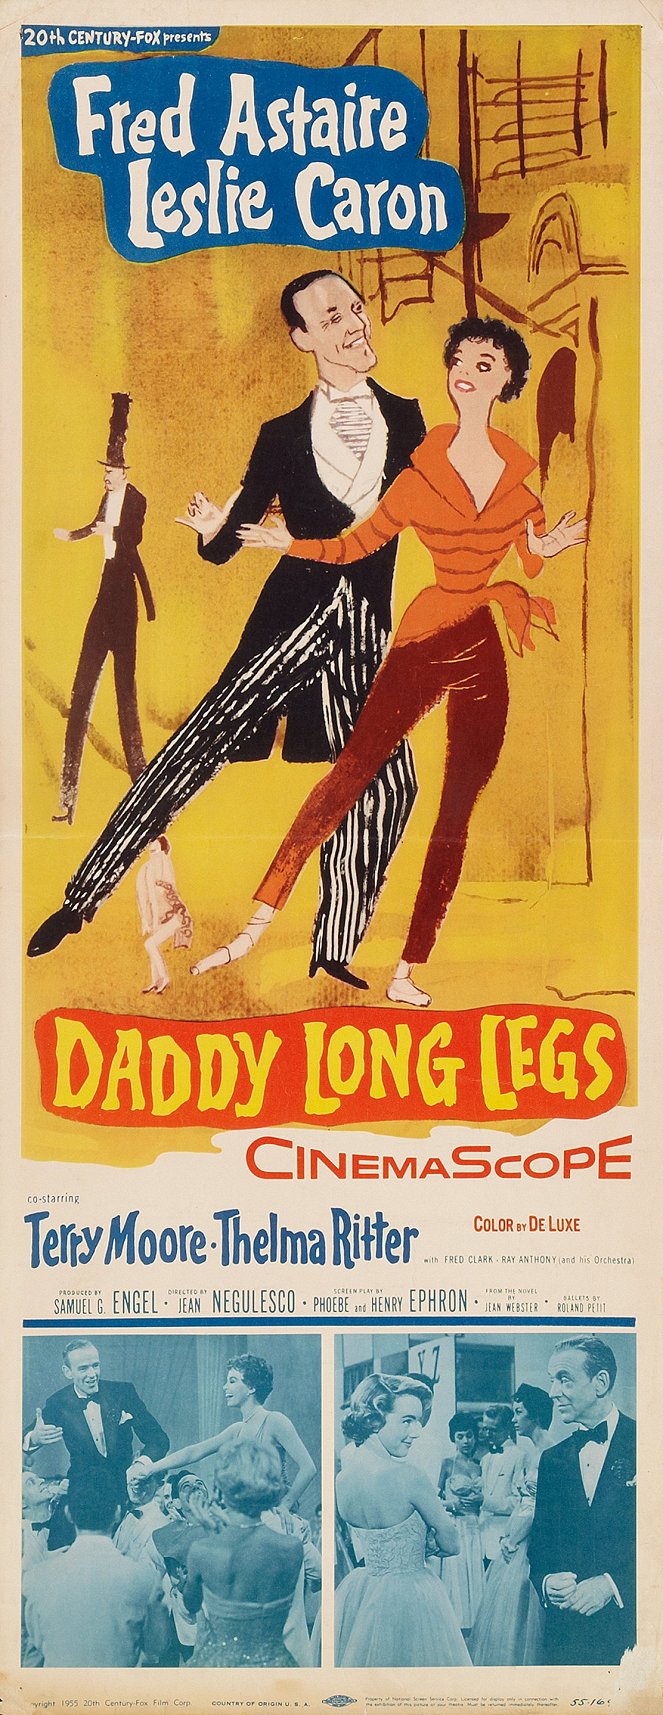 Daddy Long Legs - Posters